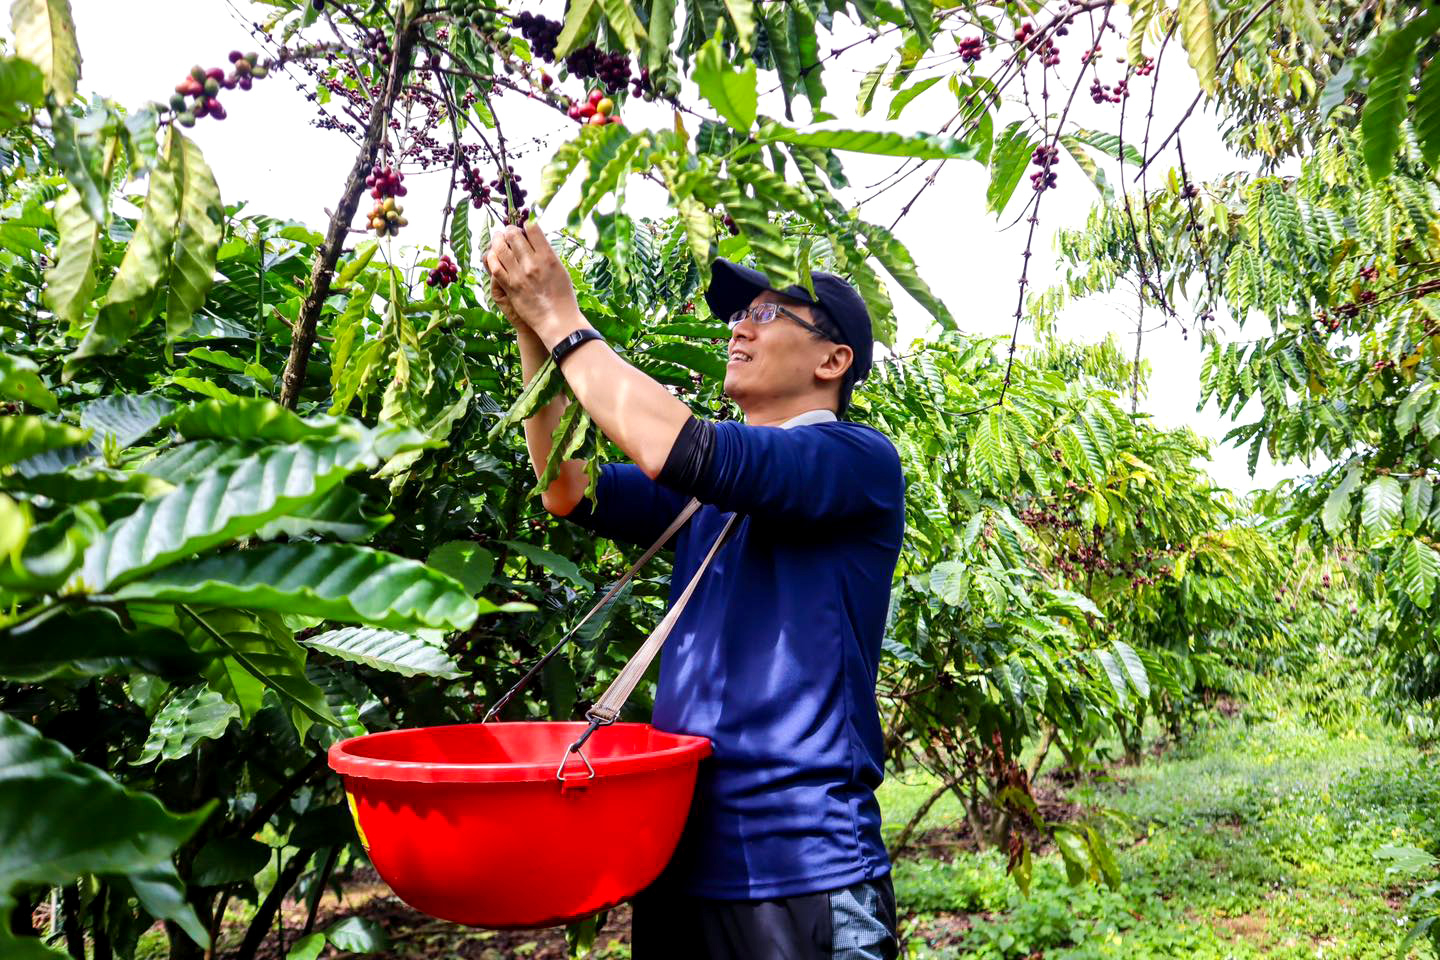 Coffee harvesting on a farm in the Central Highlands. Photo: Son Trang.